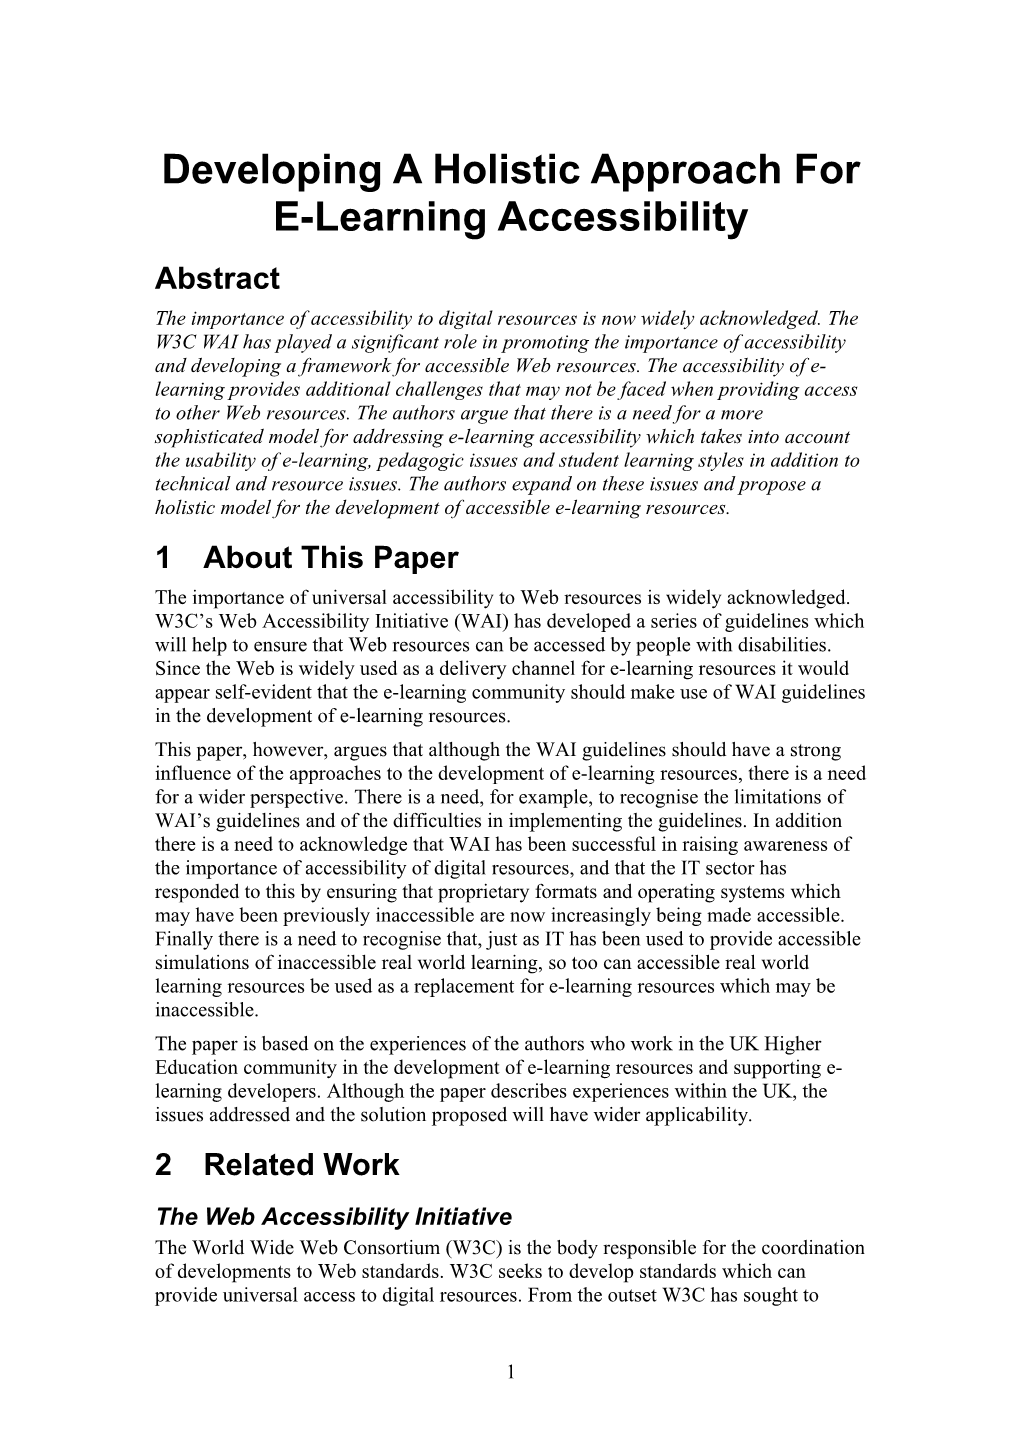 Developing A Holistic Approach For E-Learning Accessibility